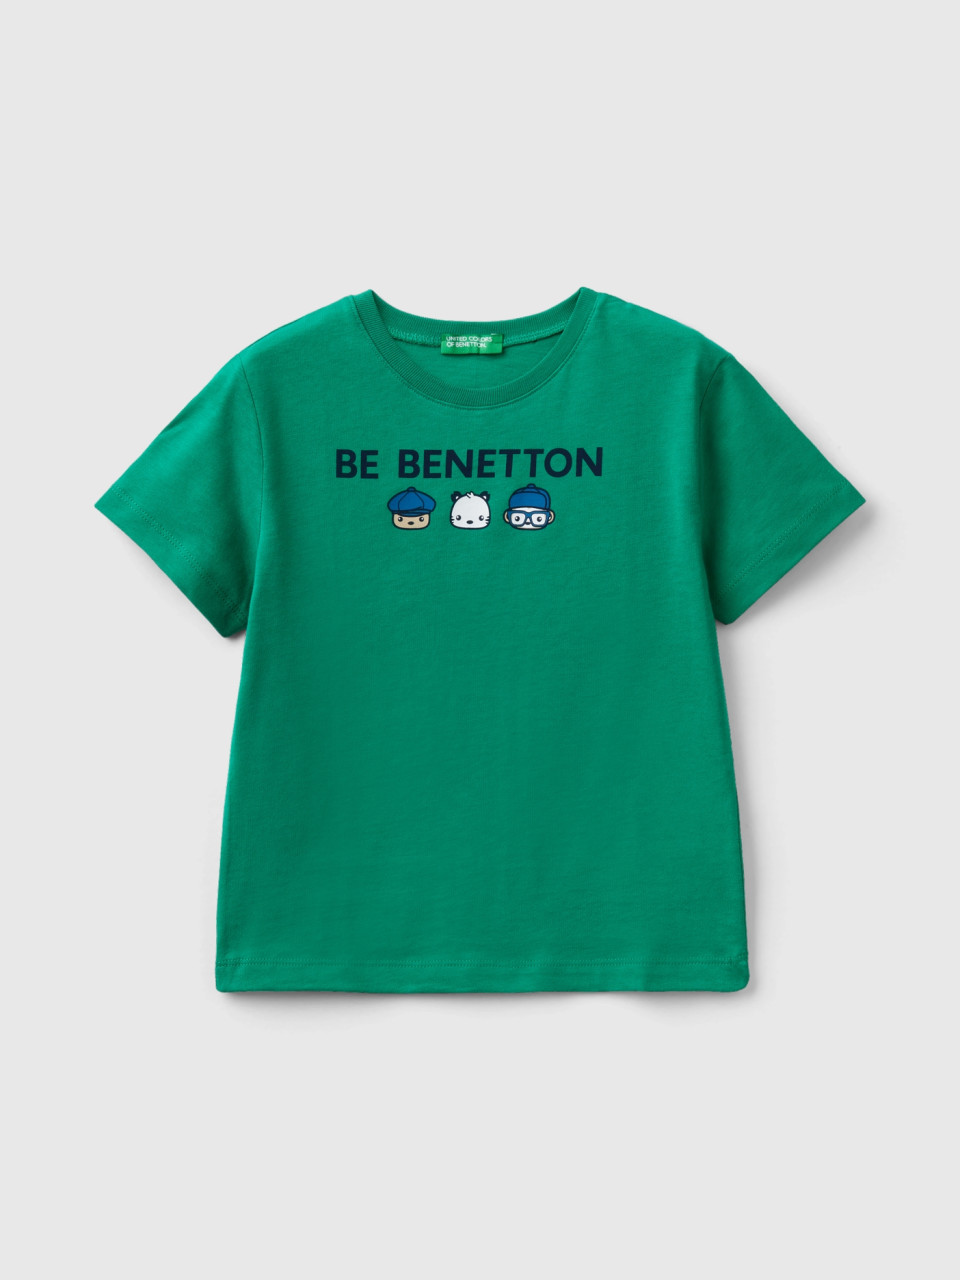 Benetton, T-shirt With Print In 100% Organic Cotton, Green, Kids